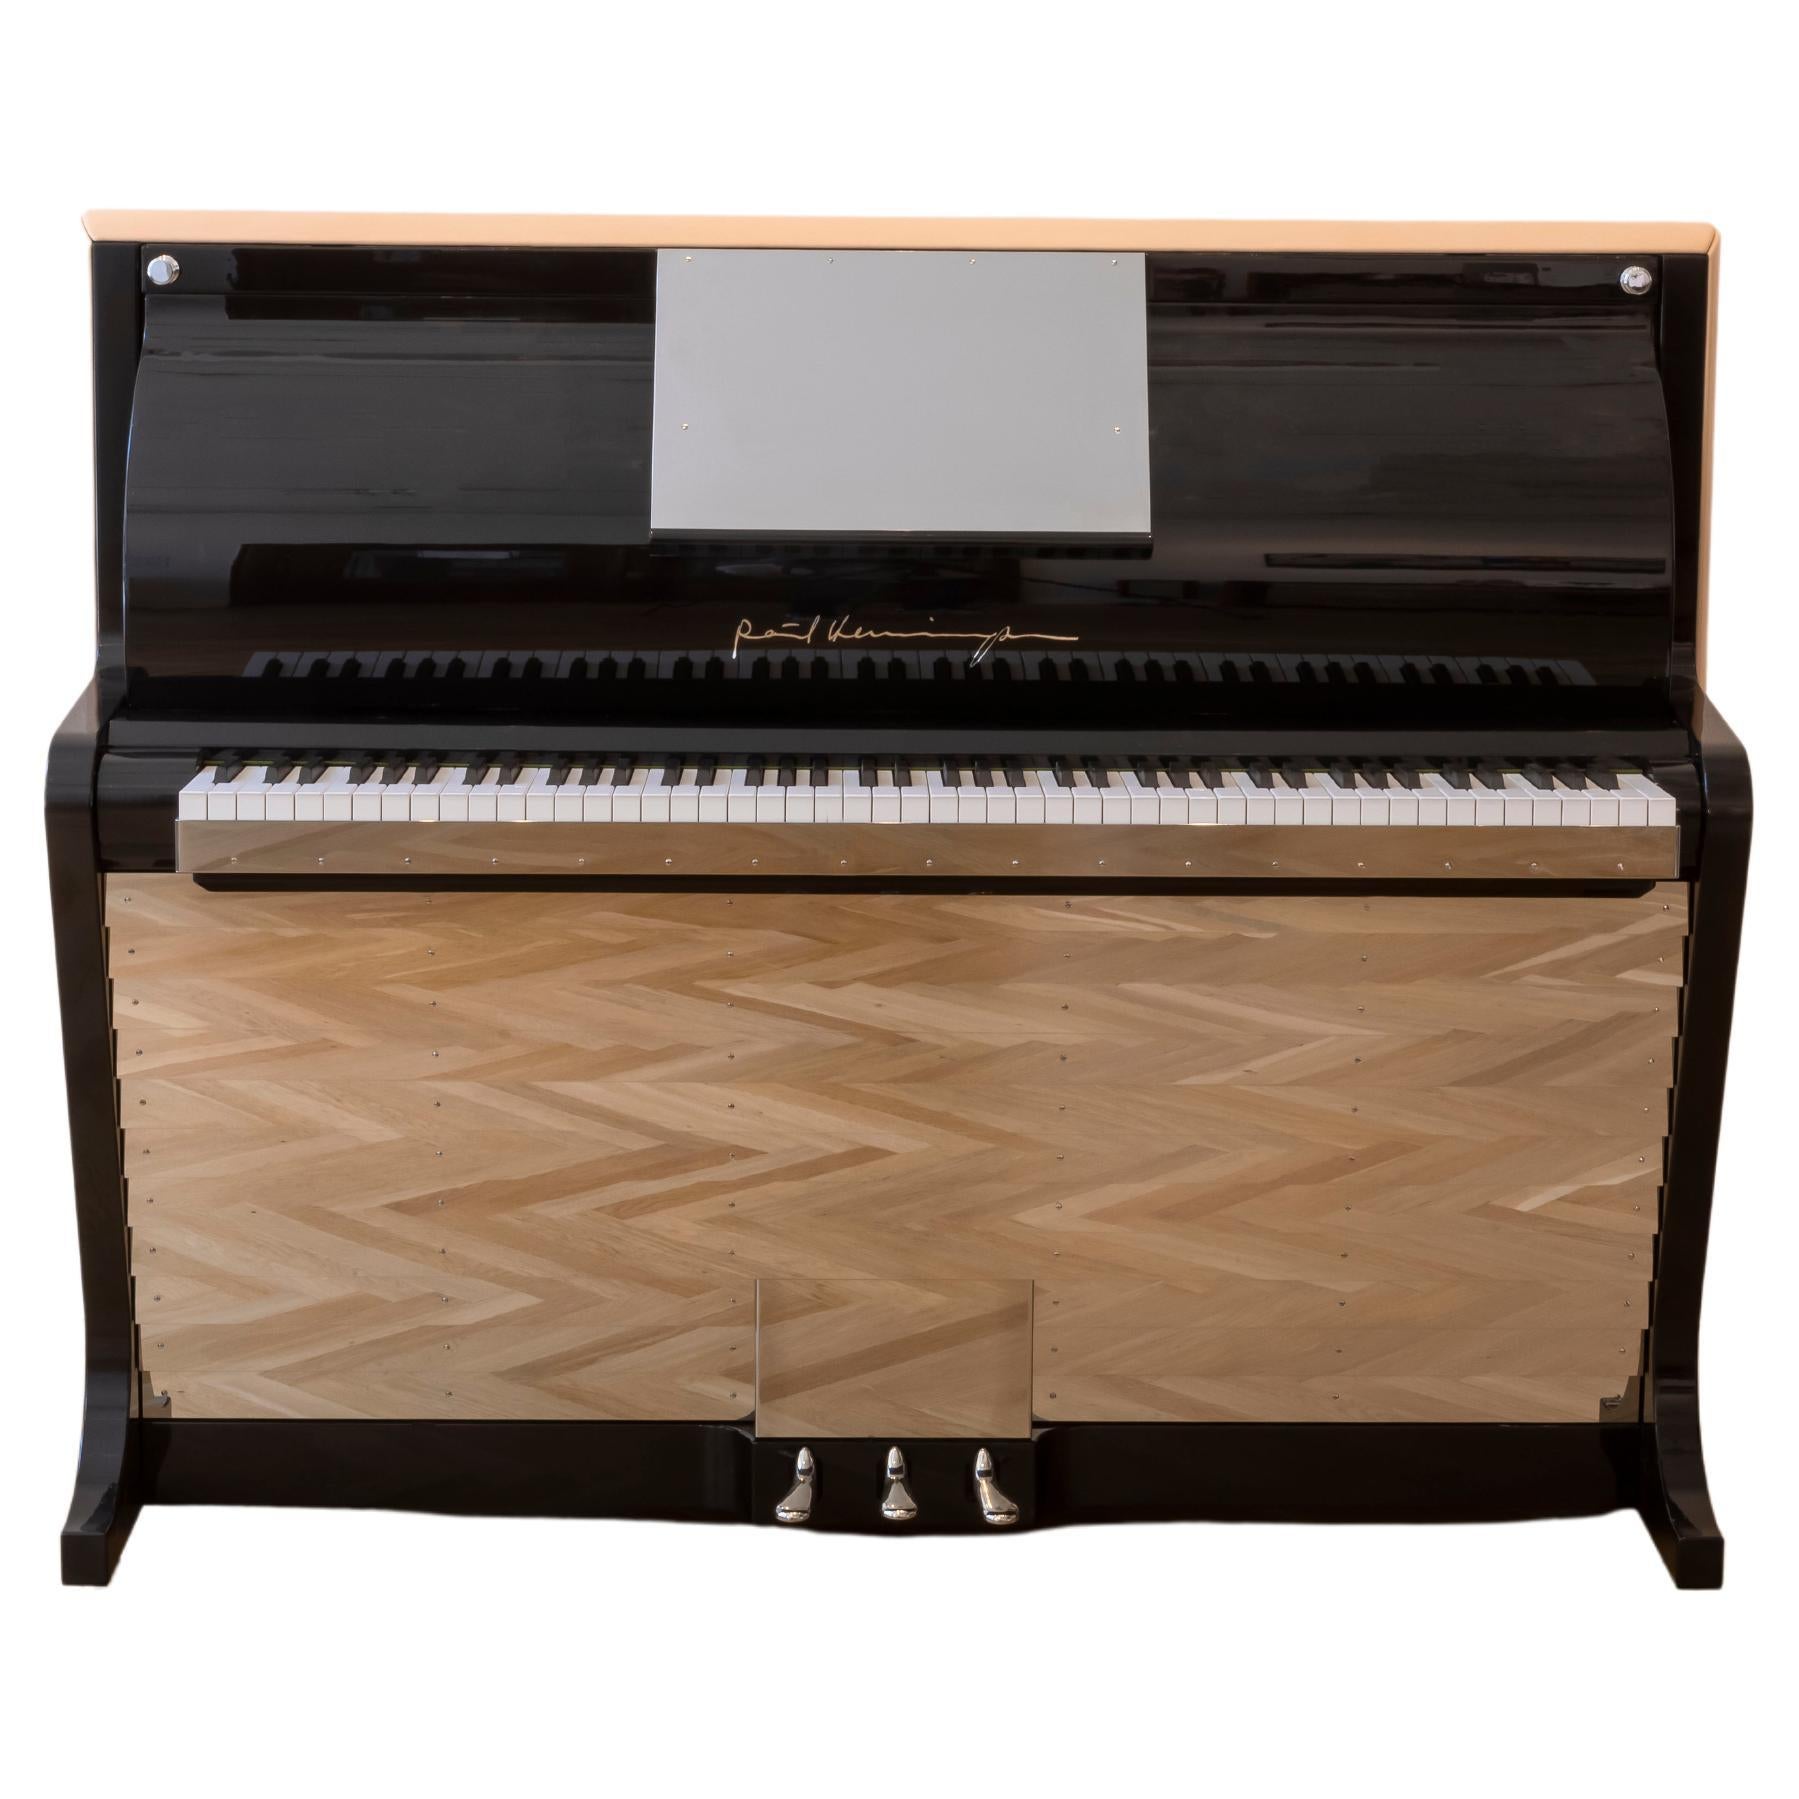 PH Upright Piano, Natural Undyed Leather with Chrome Metal Parts and Wood Panels